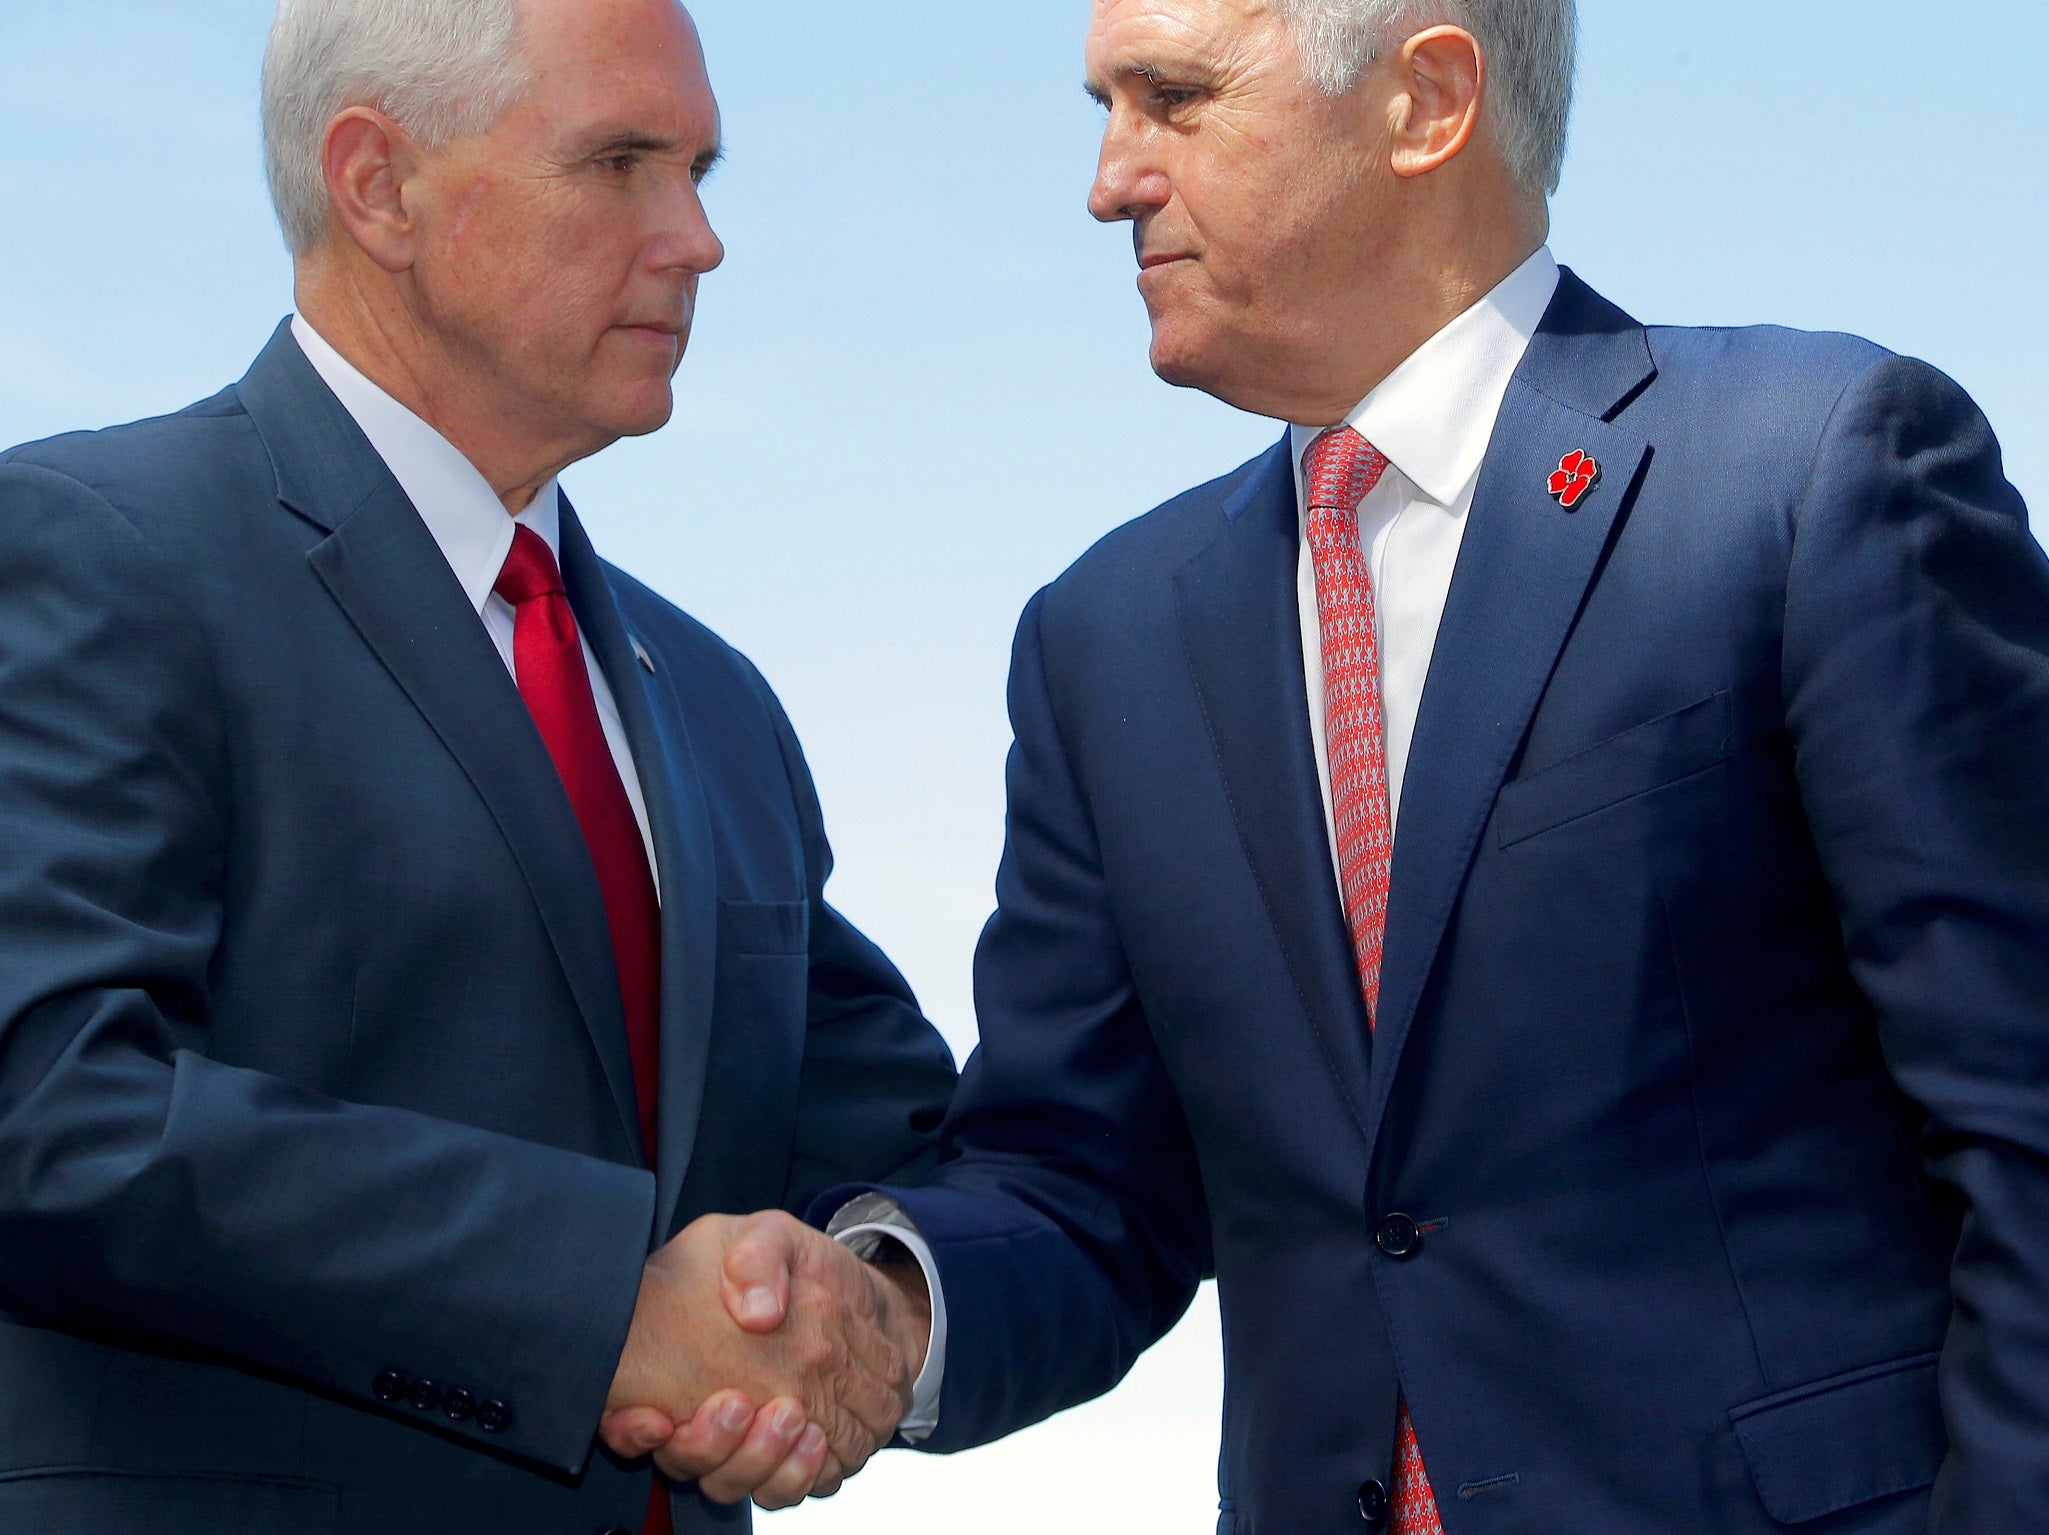 Mike Pence shook hands with Prime Minister Malcolm Turnbull after announcing a US commitment to the refugee resettlement deal